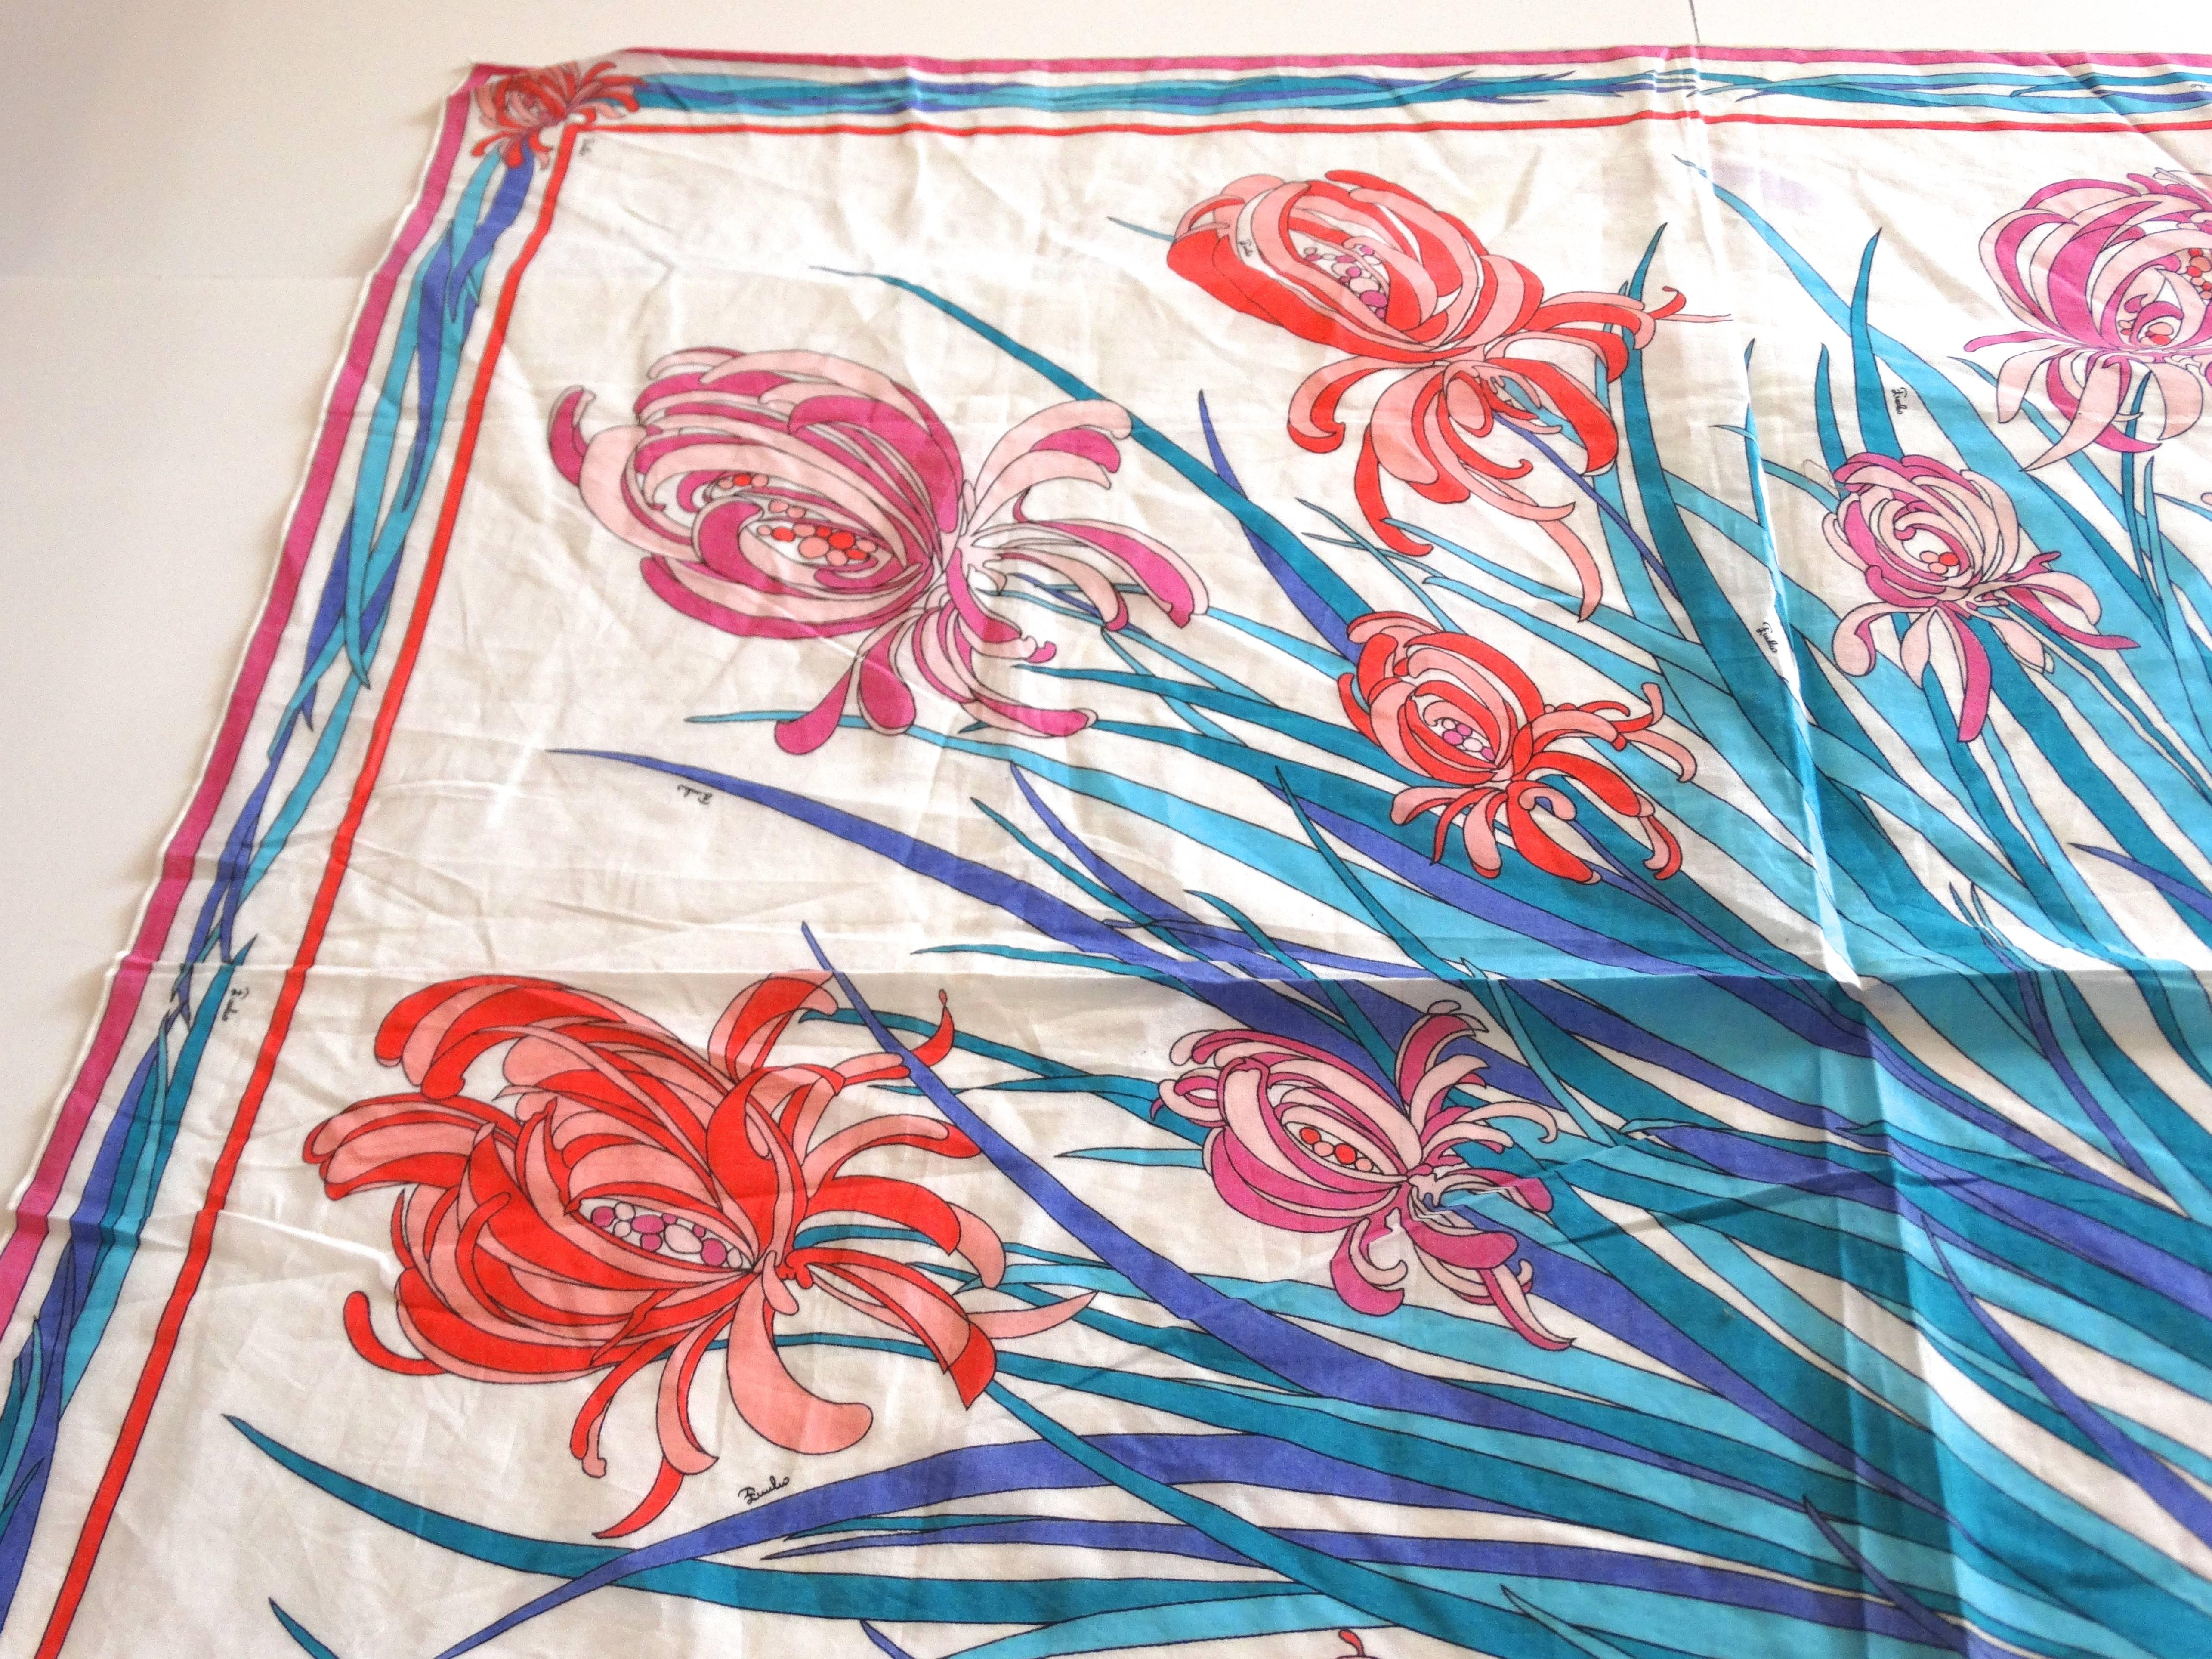 Taken it back to 1973 ...What a great example of the amazing prints Emilio Pucci was so famous for. Orange,pinks and peach iris flowers on top of a spray of blue stems. Abstract, and whimsical, this signature Pucci print is very recognizable and